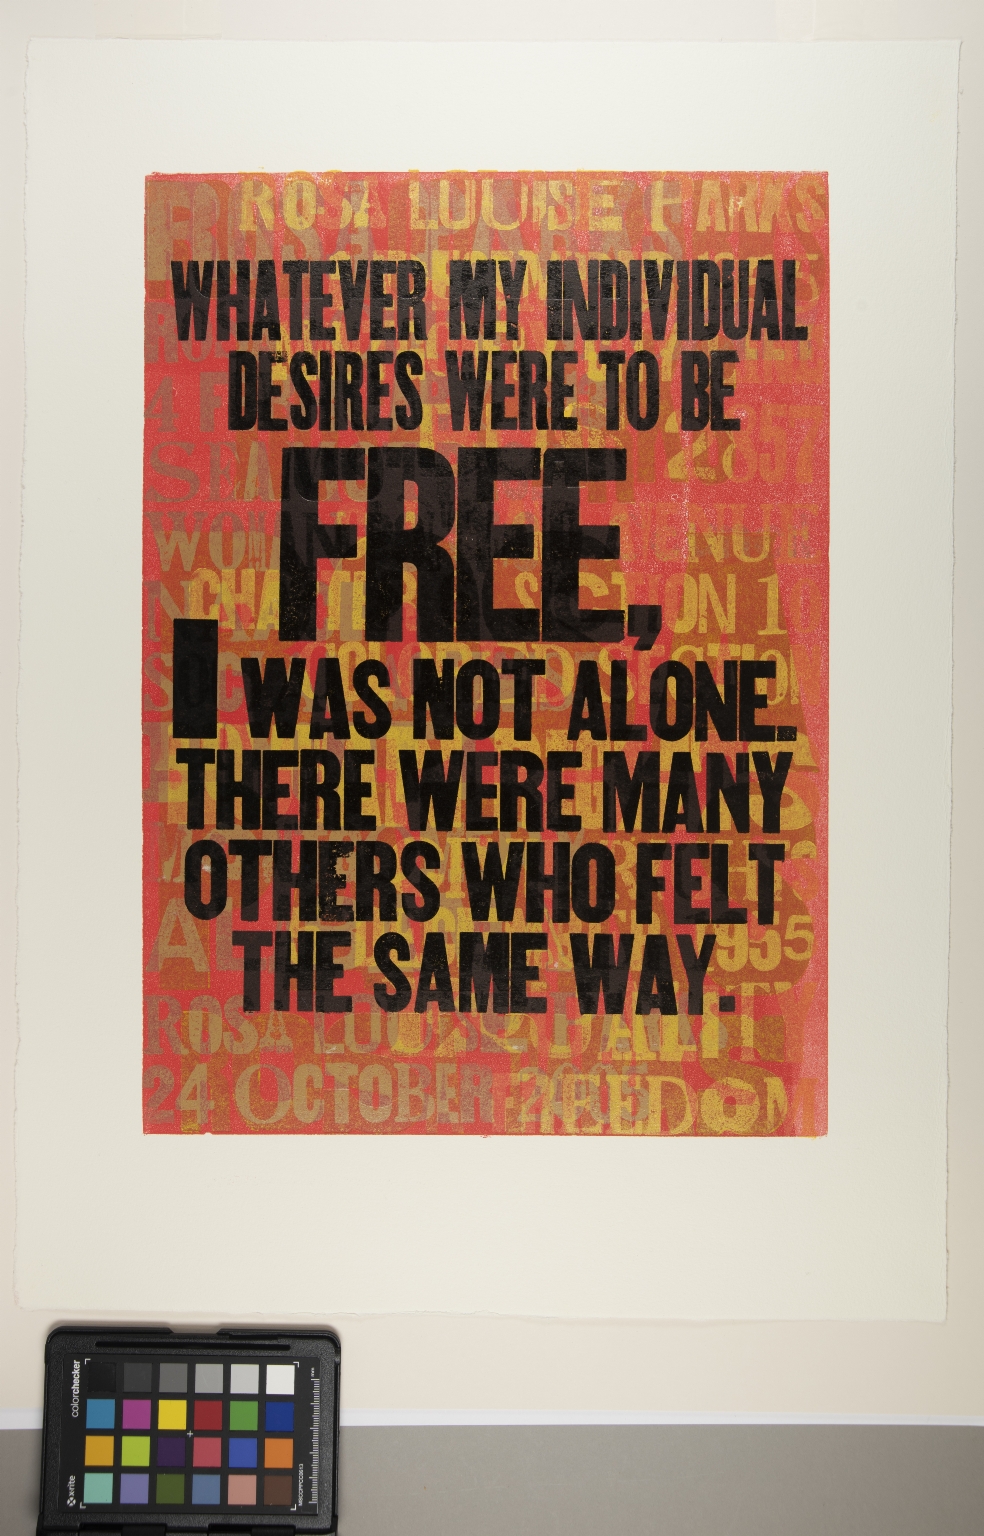 Fourteen Quotes from Rosa Louise Parks, Civil Rights Activist: "Whatever my individual desires were to be free, I was not alone. There were many others who felt the same way."